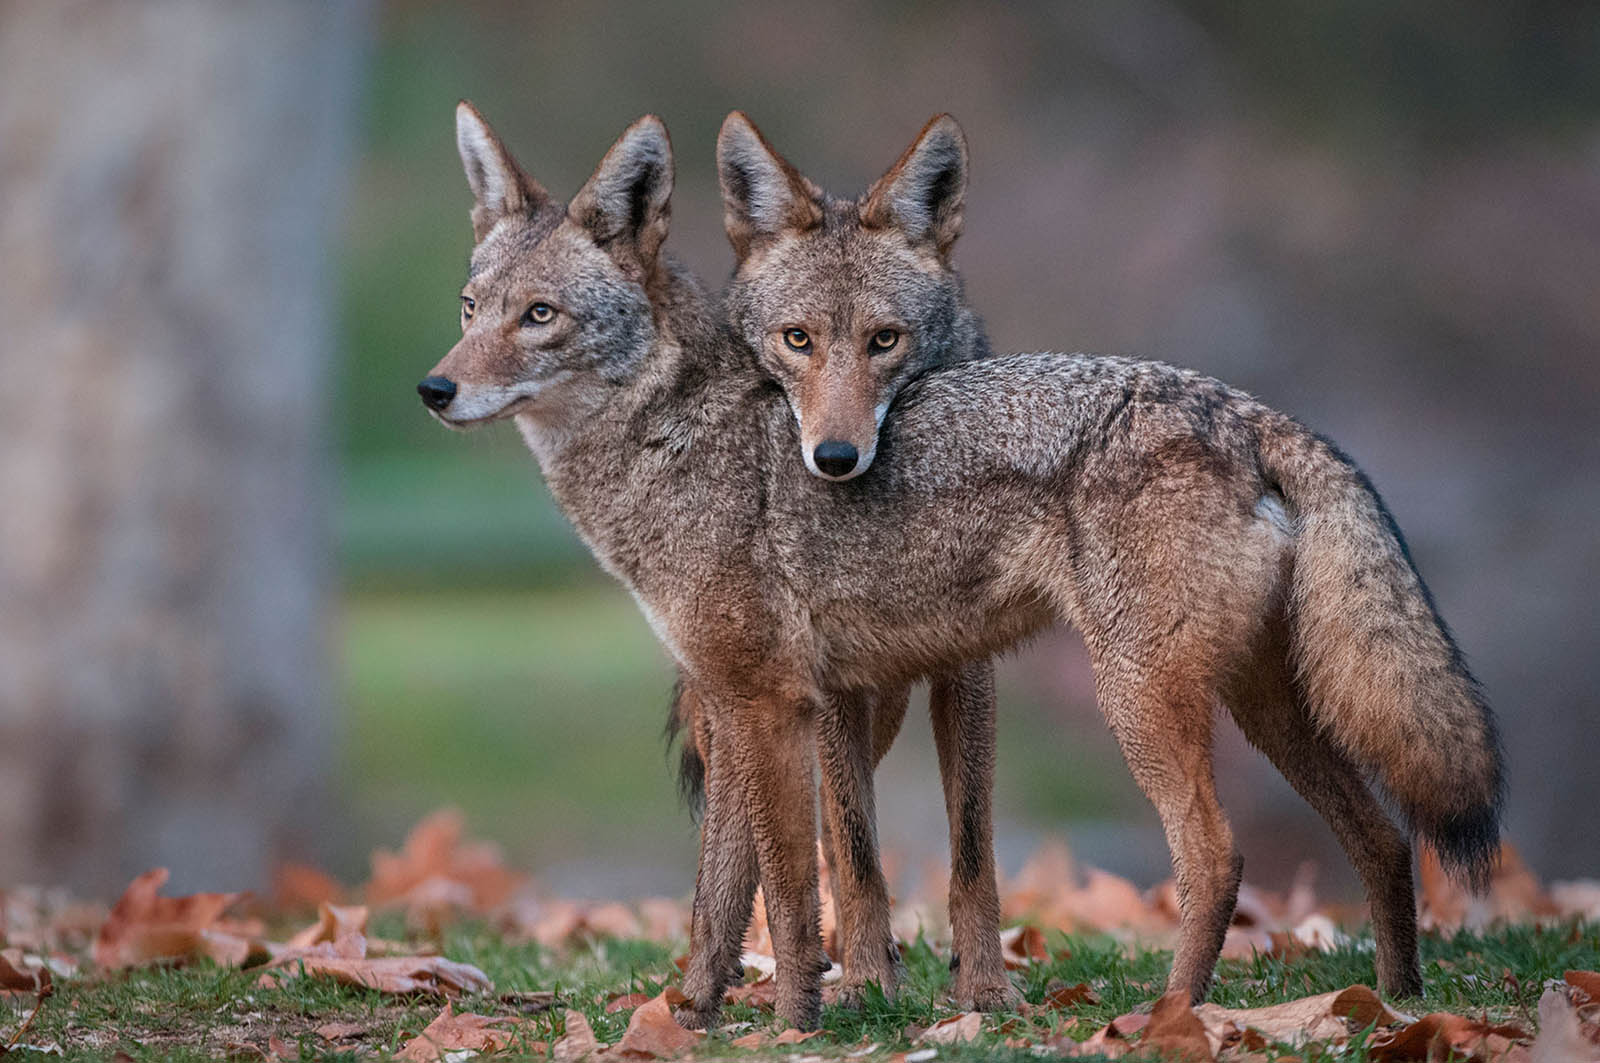 Passing This General Knowledge Quiz Means You Know Lot About Everything Coyotes